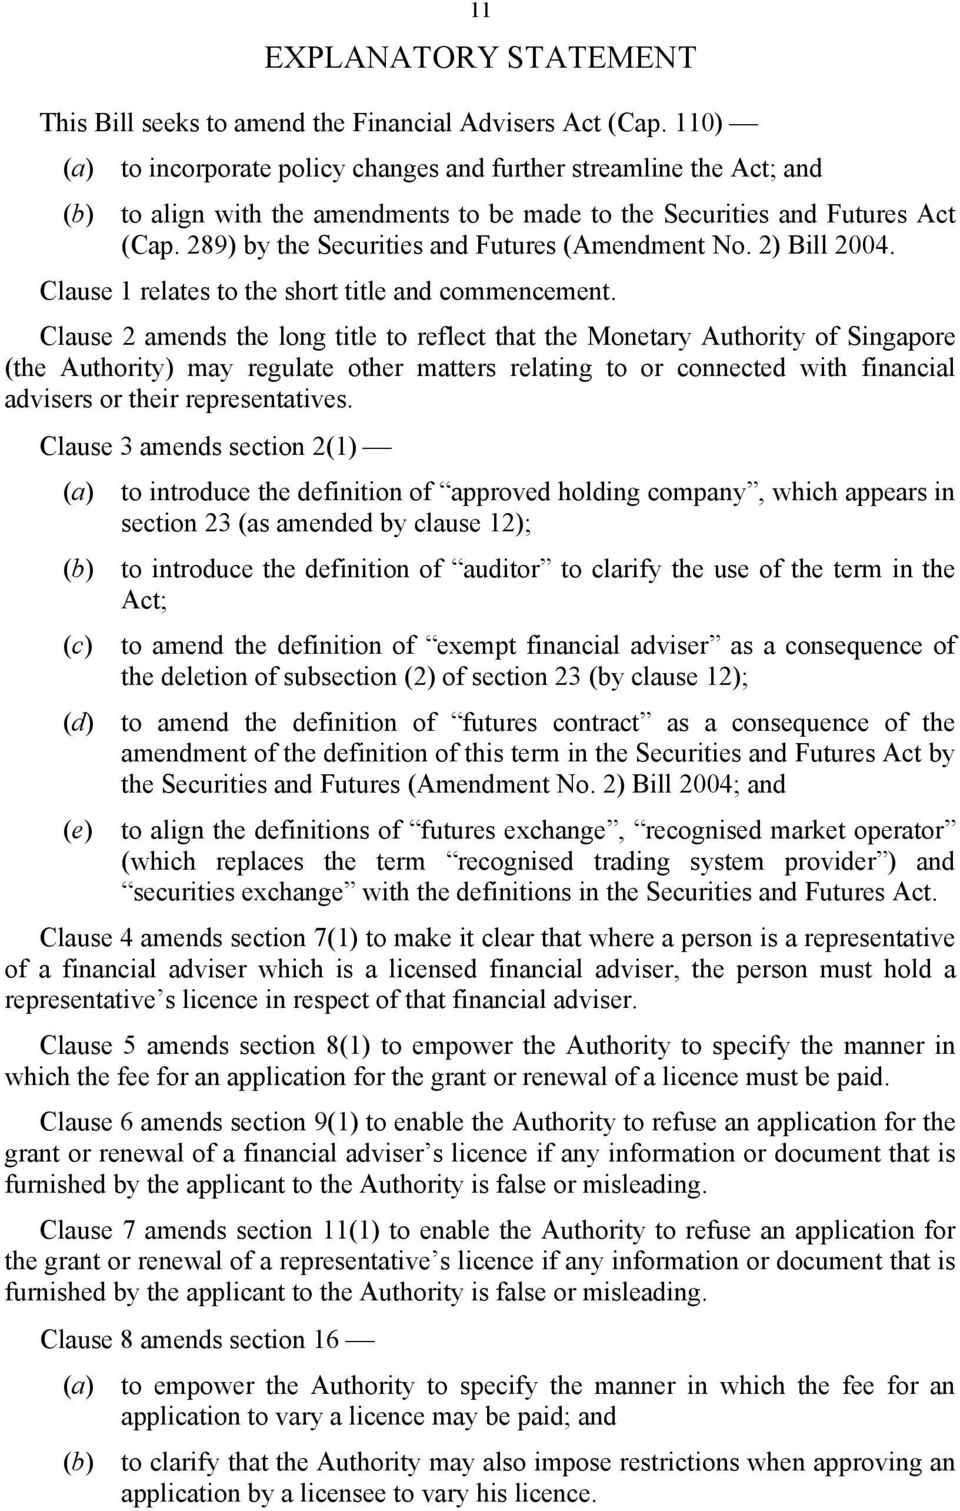 289) by the Securities and Futures (Amendment No. 2) Bill 04. Clause 1 relates to the short title and commencement.